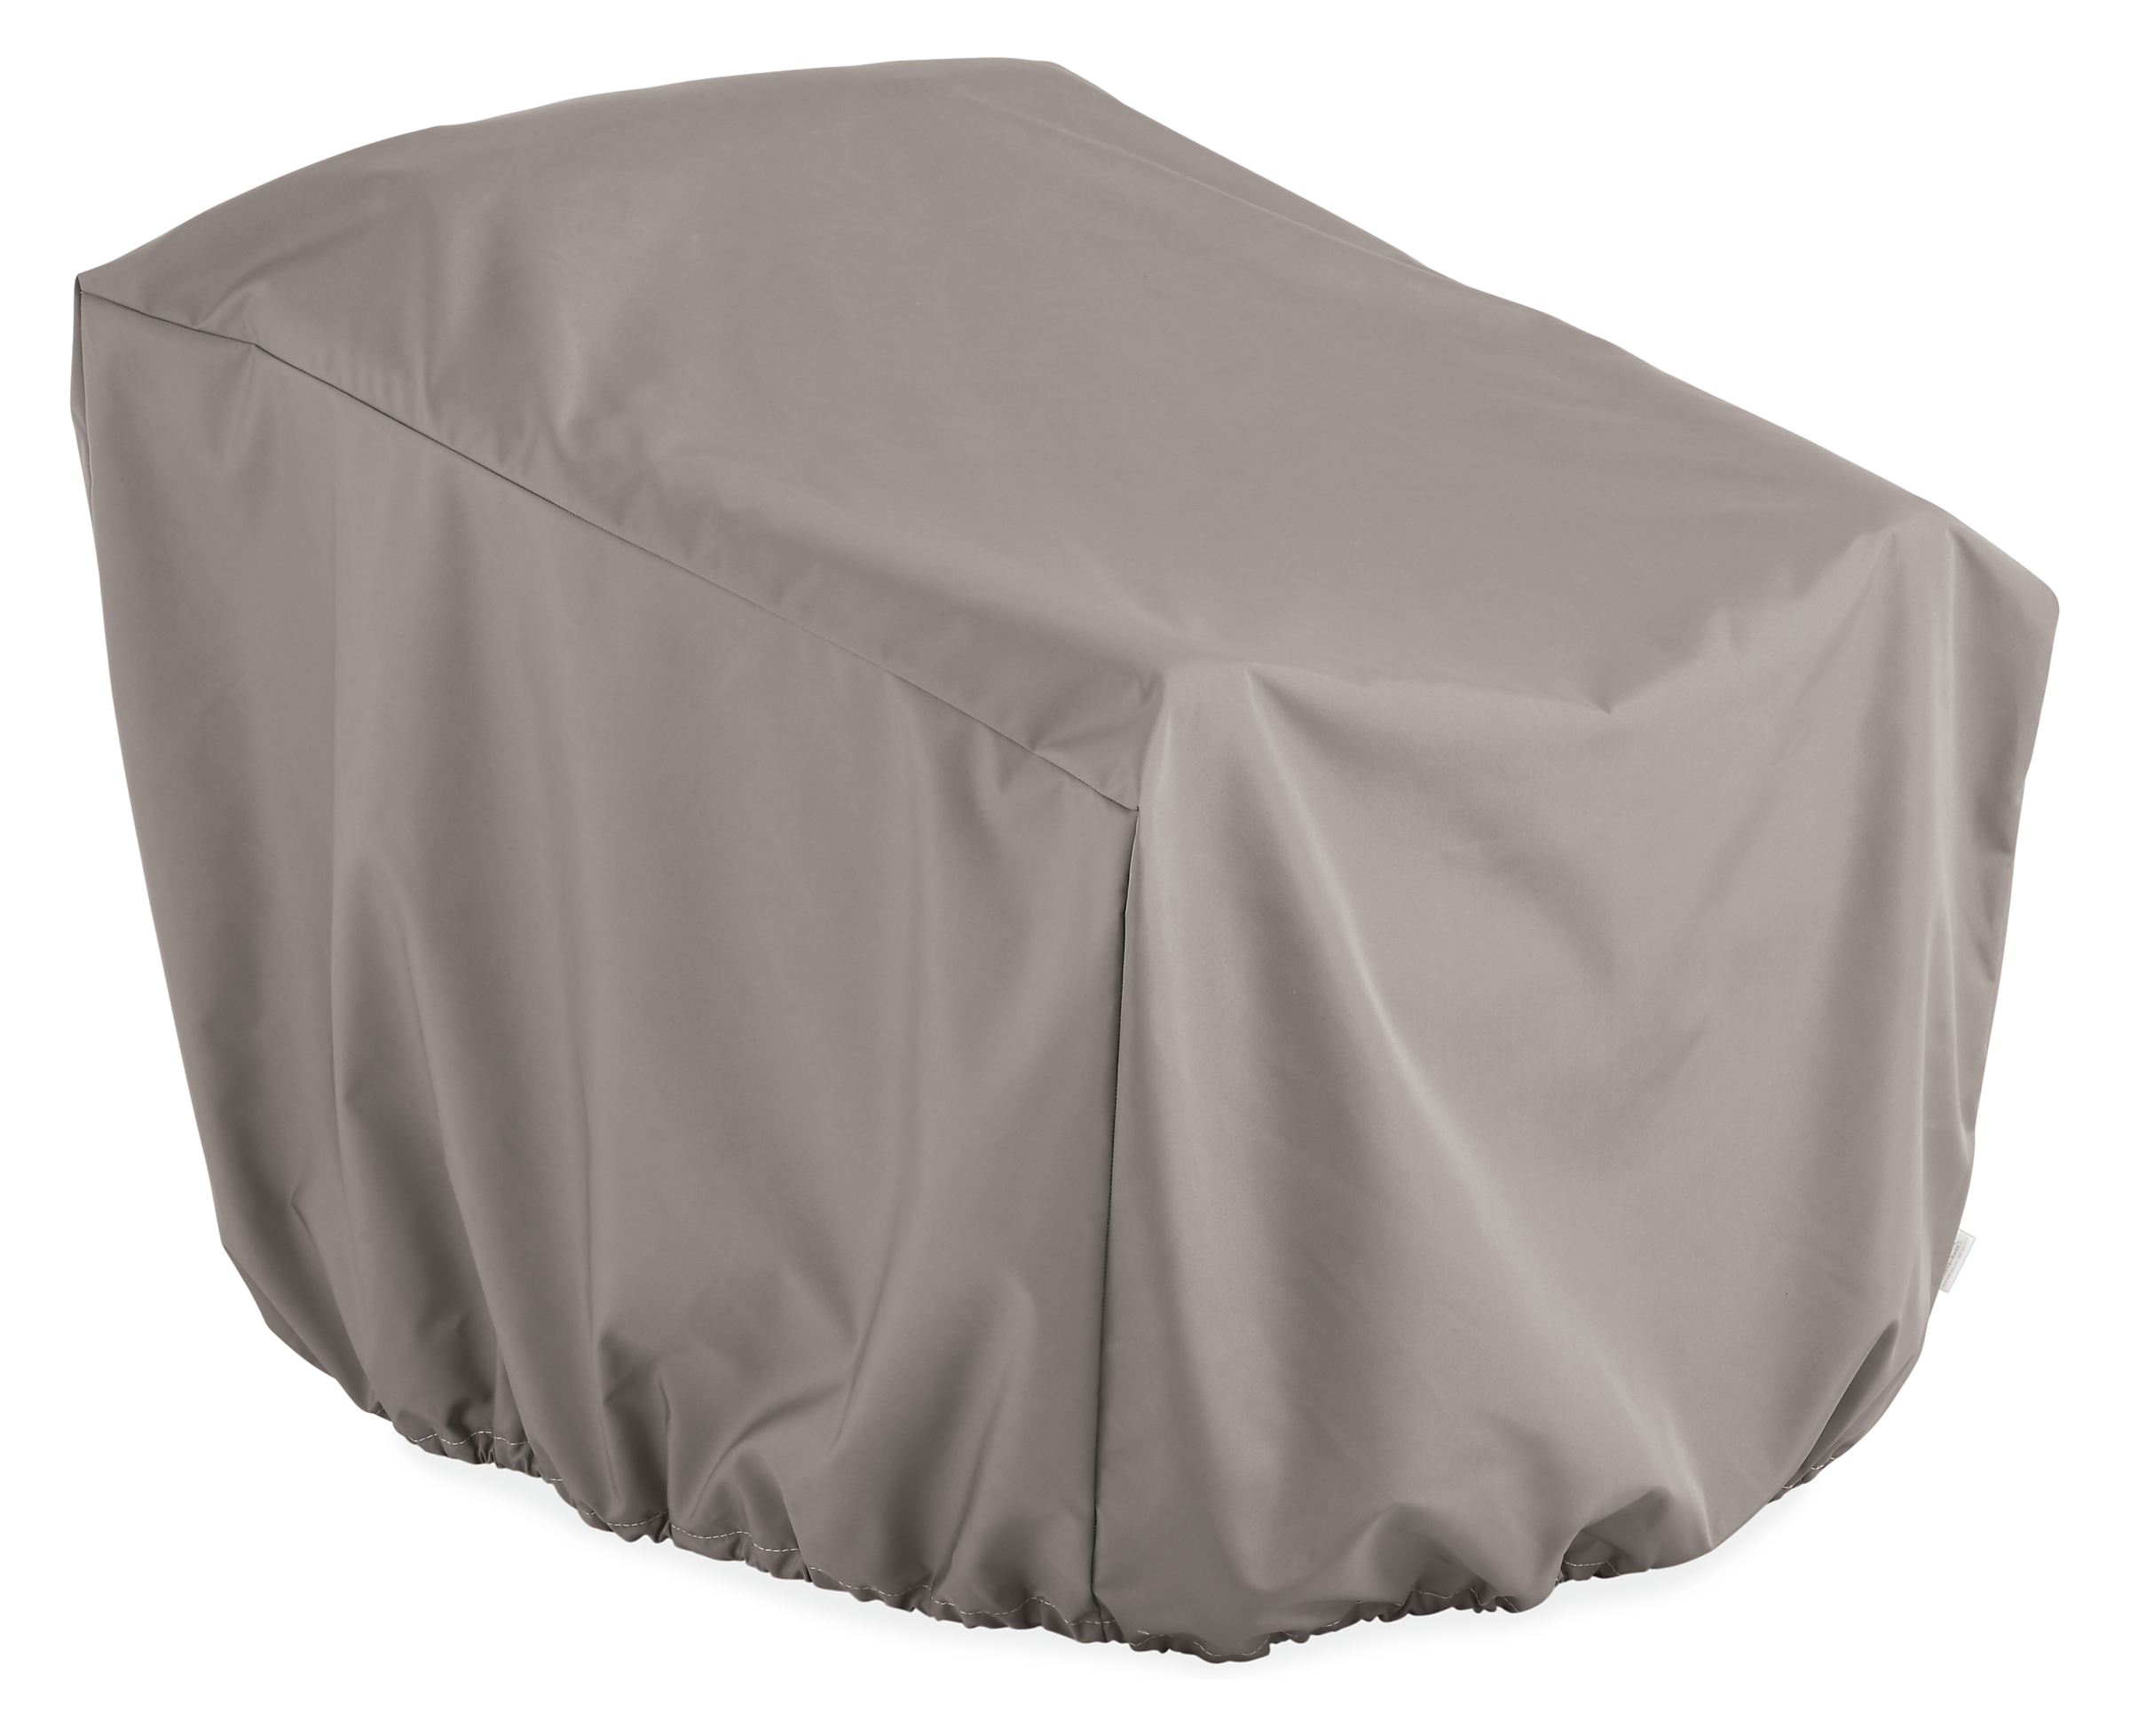 Outdoor Cover for Chair 58 diam 33h with Drawstring